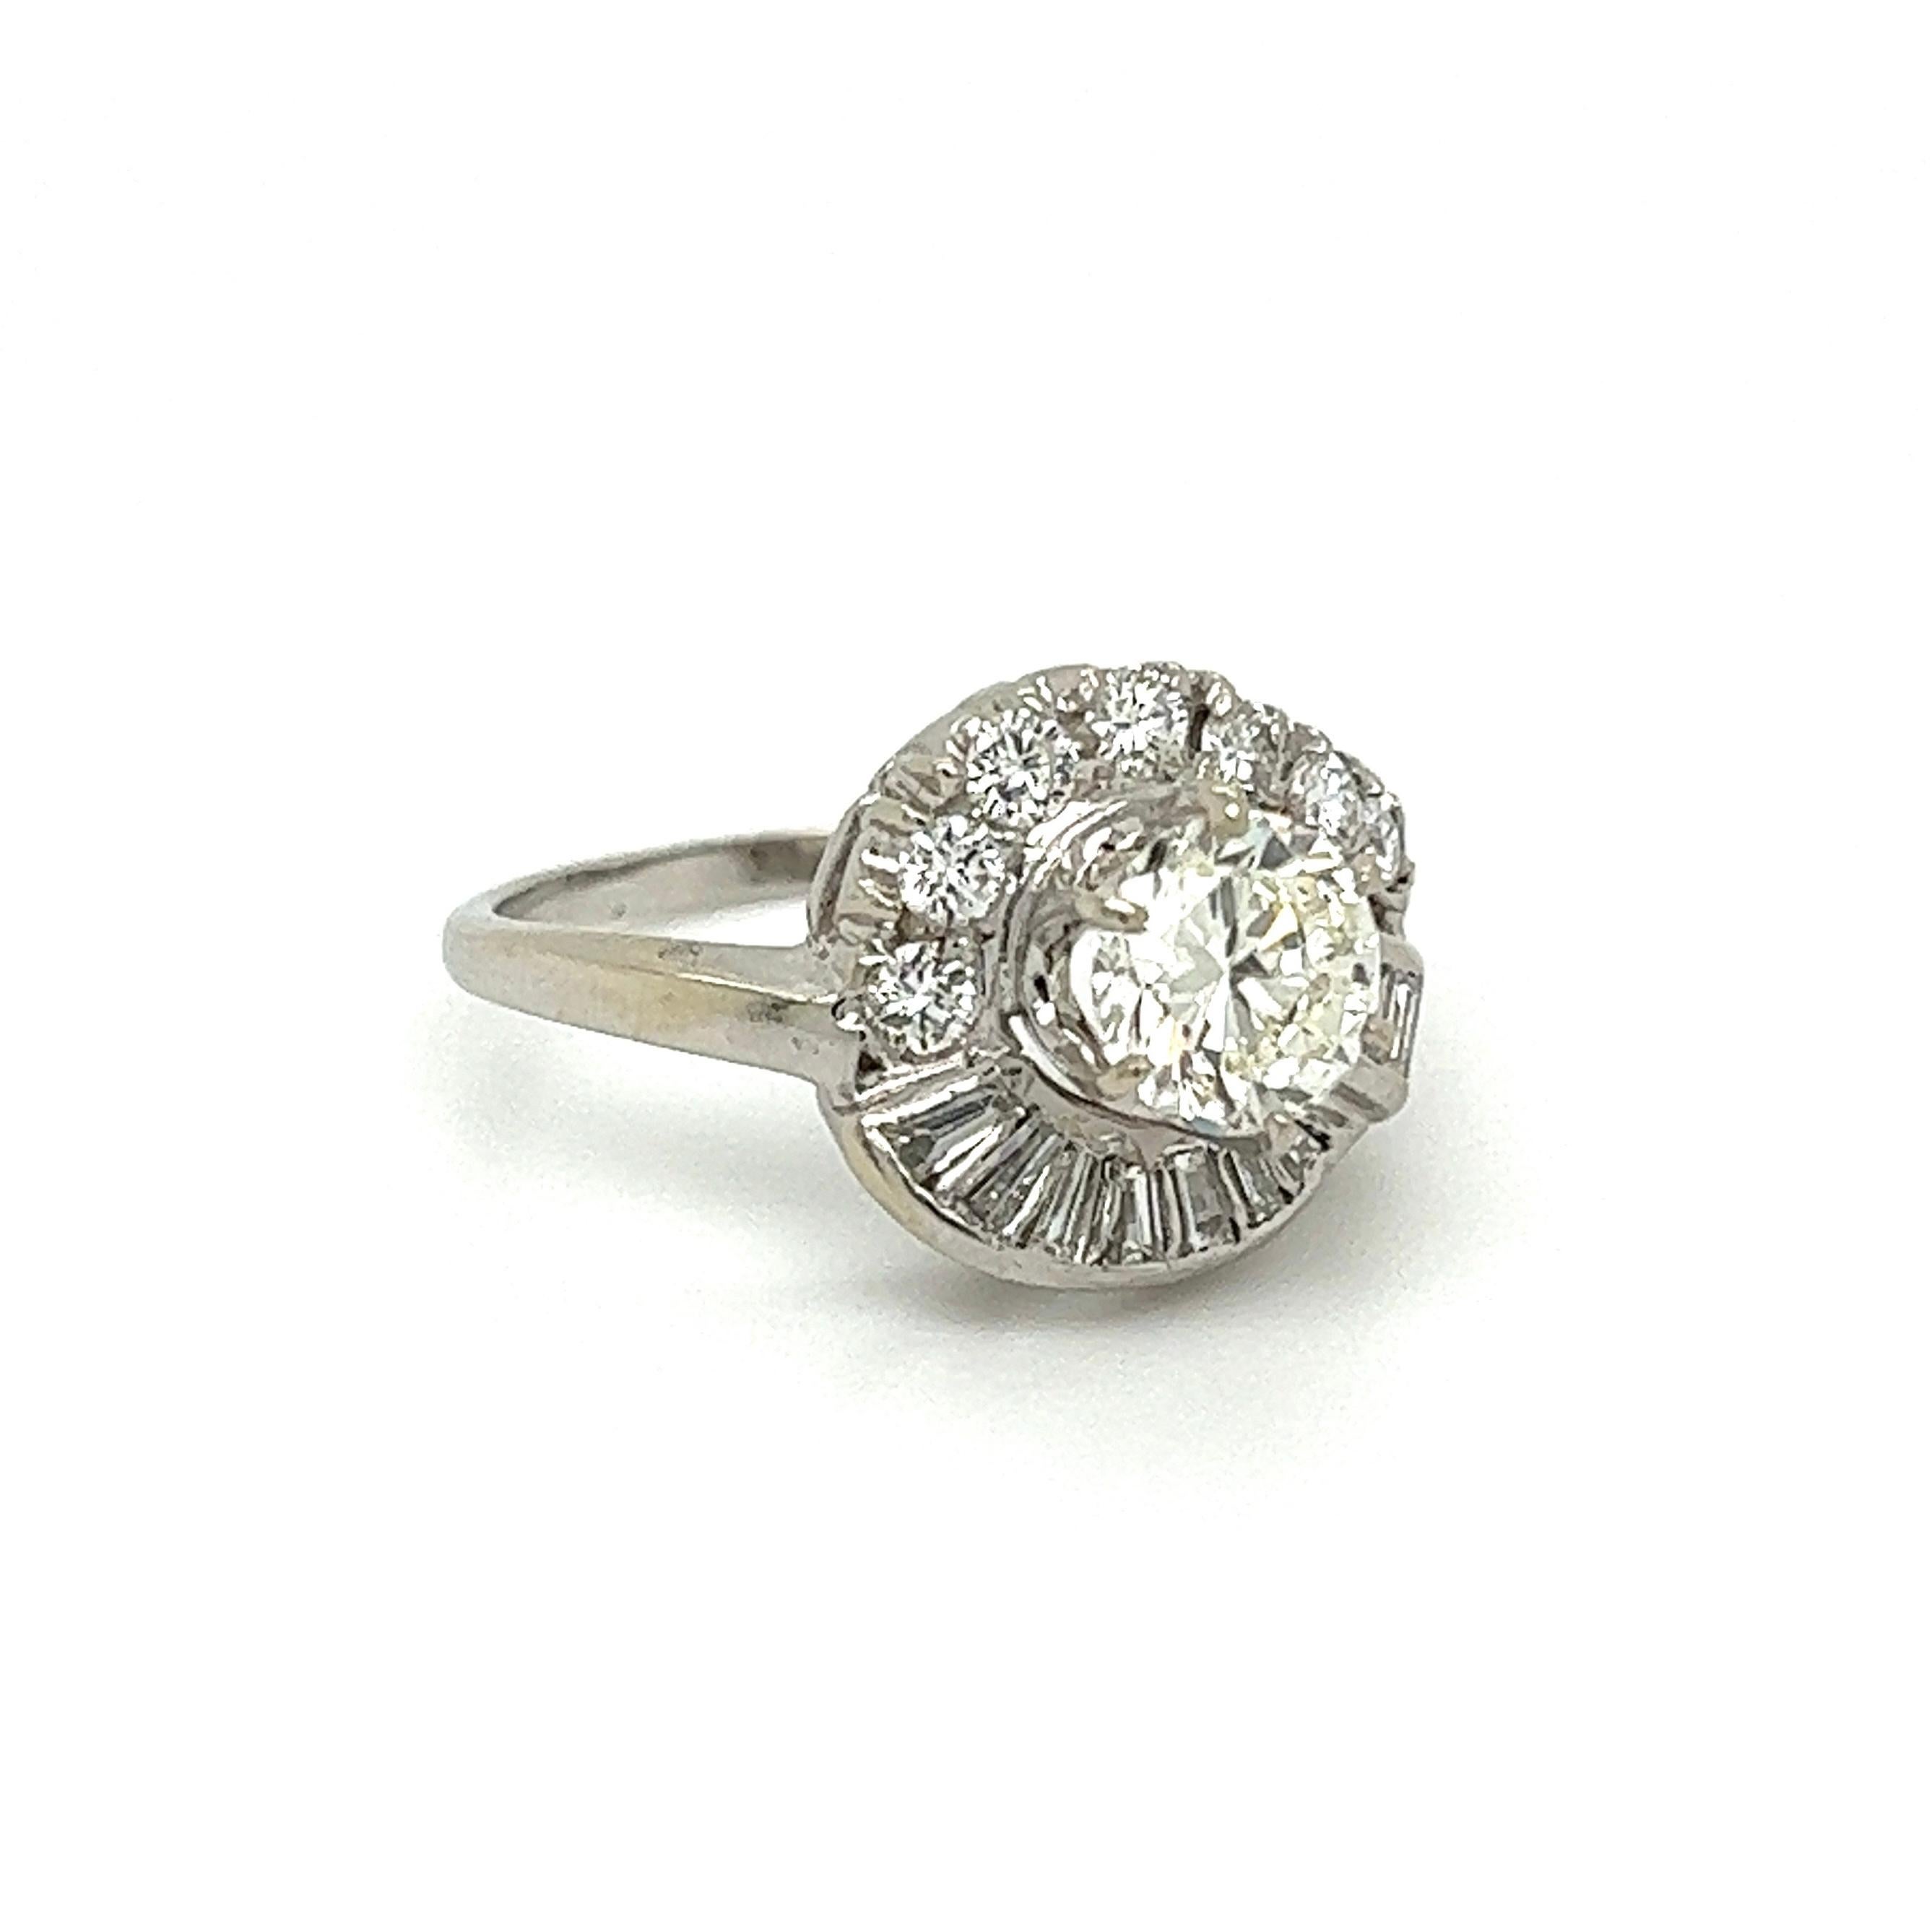 Simply Beautiful! Finely detailed Retro Diamond Swirl Design Gold Cocktail Ring. Centering a securely nestled Hand set 1.01 Carat Transitional RBC Diamond, measuring 6.50mm, weighing approx. 1.01 Carat. Estimated grade J-VS1. Surrounded by Baguette